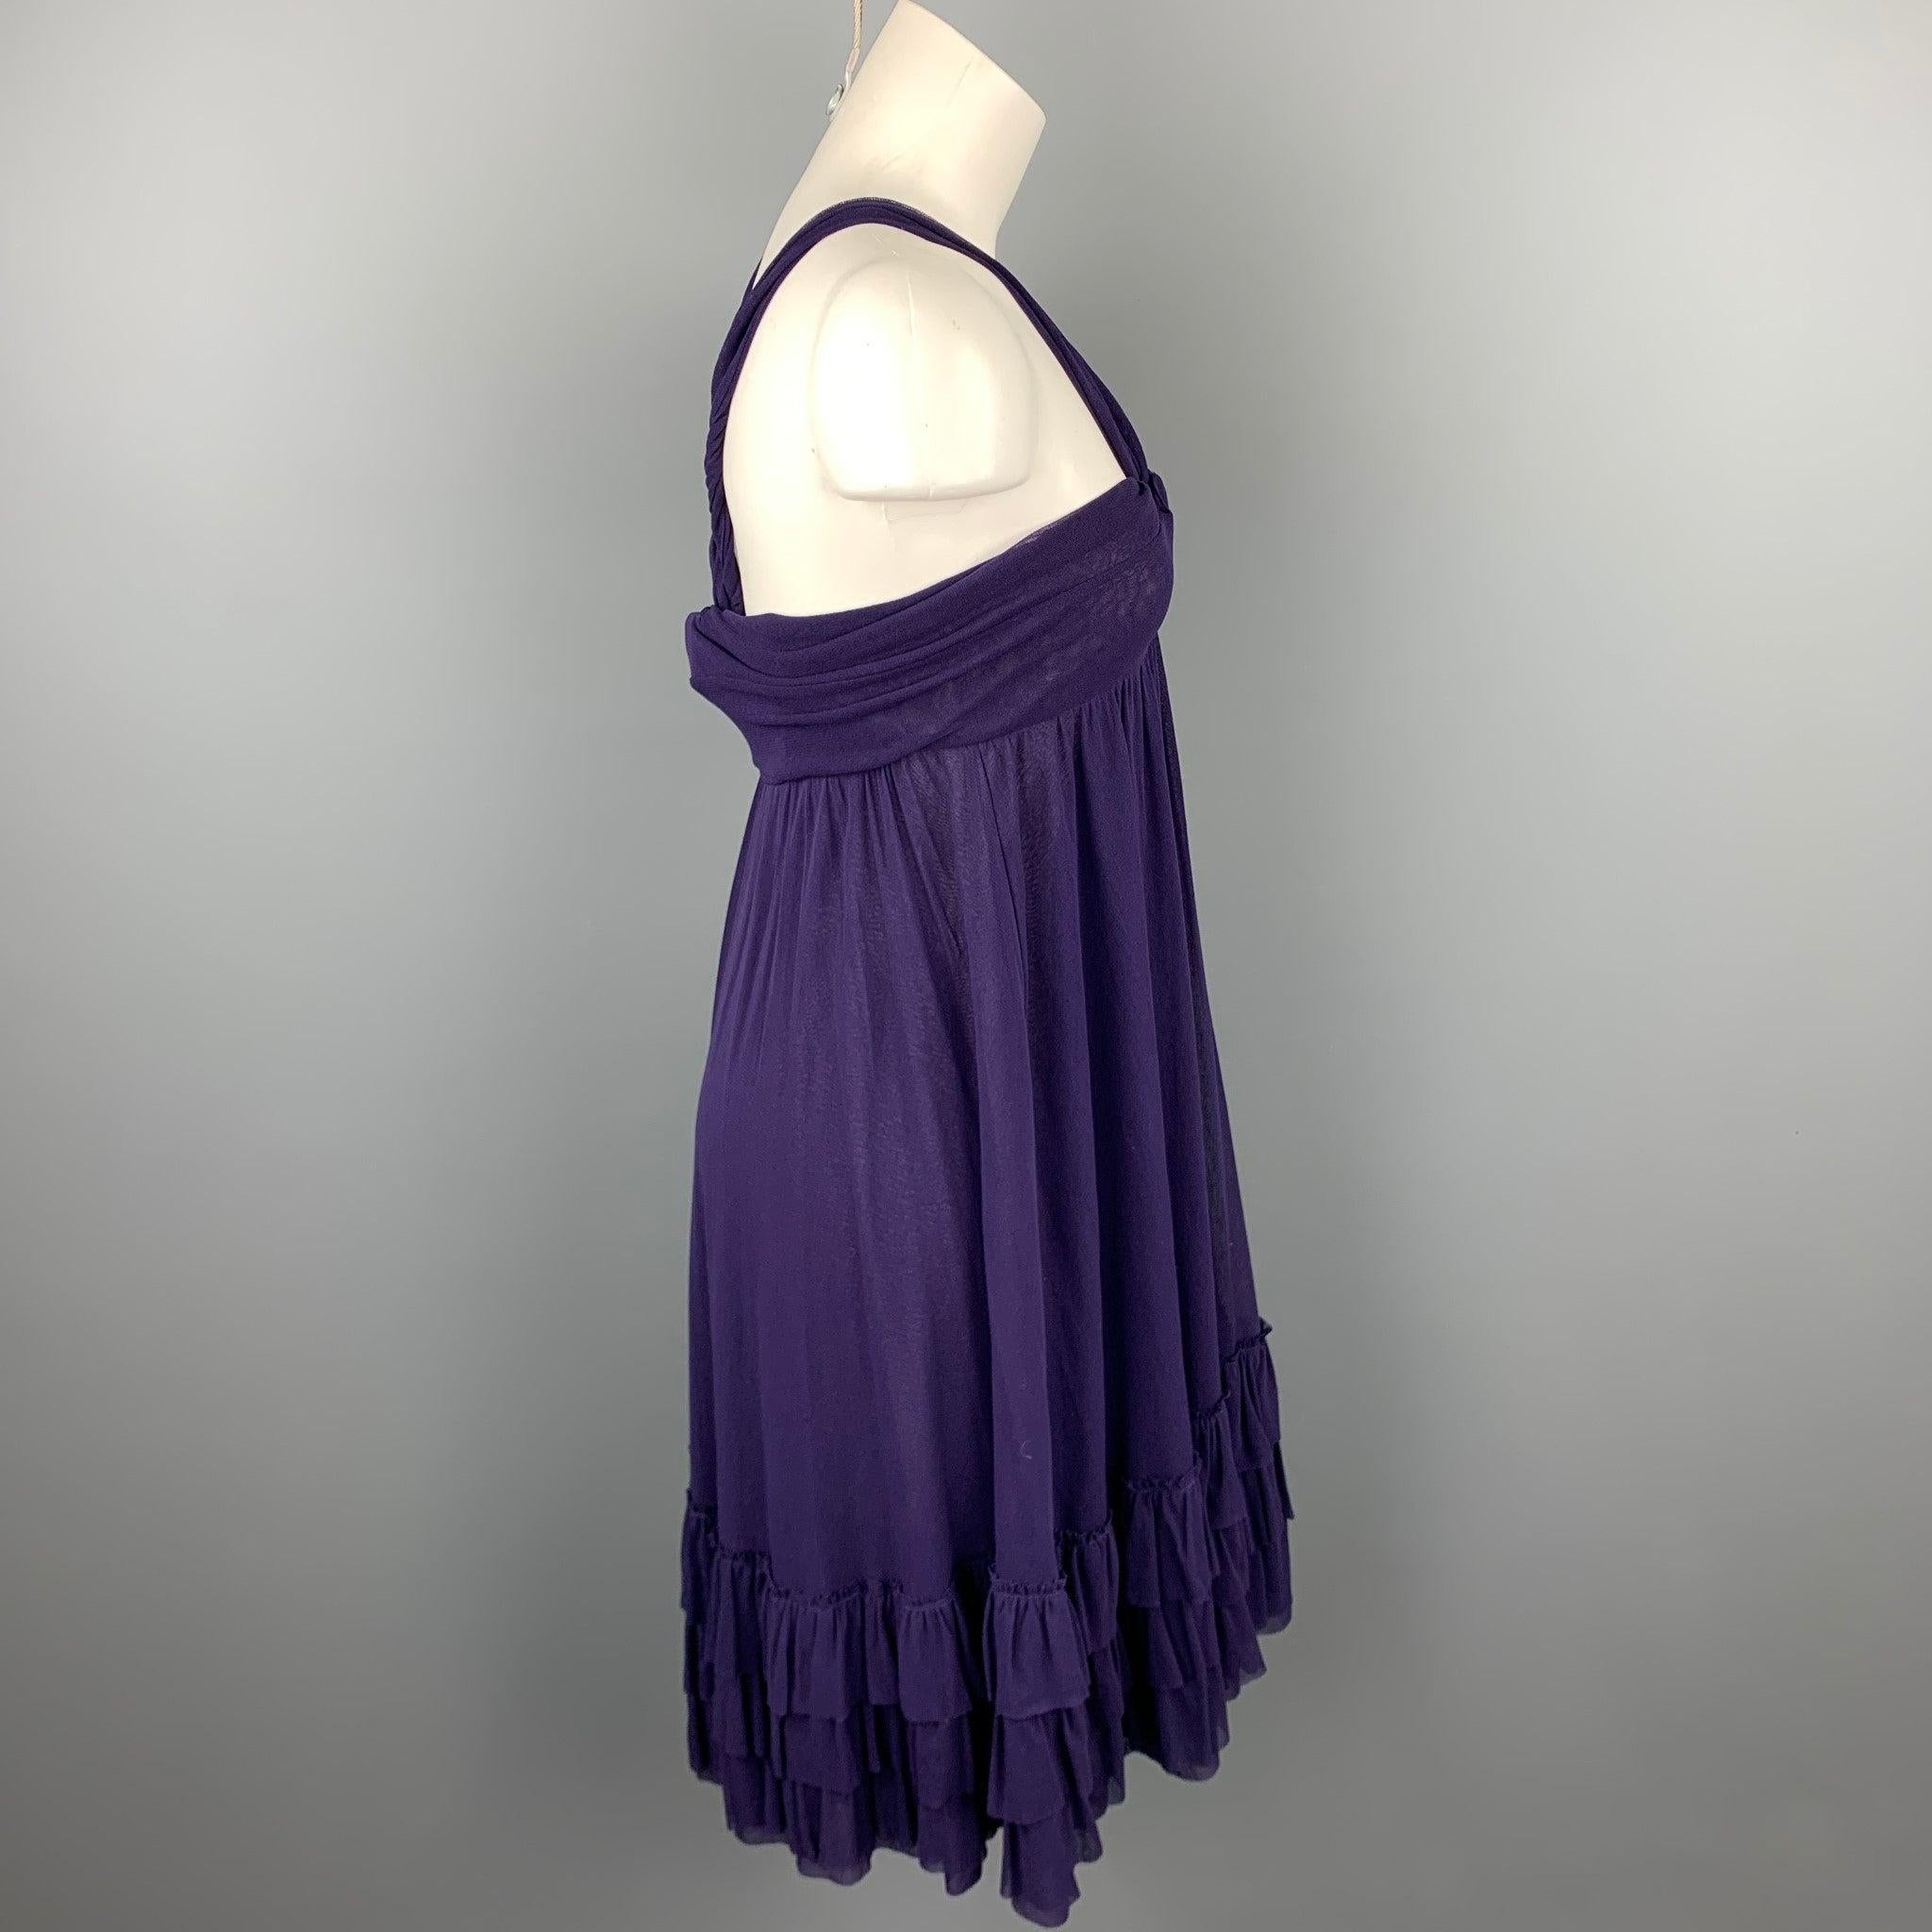 JEAN PAUL GAULTIER Size M Eggplant Purple Tulle Polimide Cocktail Dress In Good Condition For Sale In San Francisco, CA